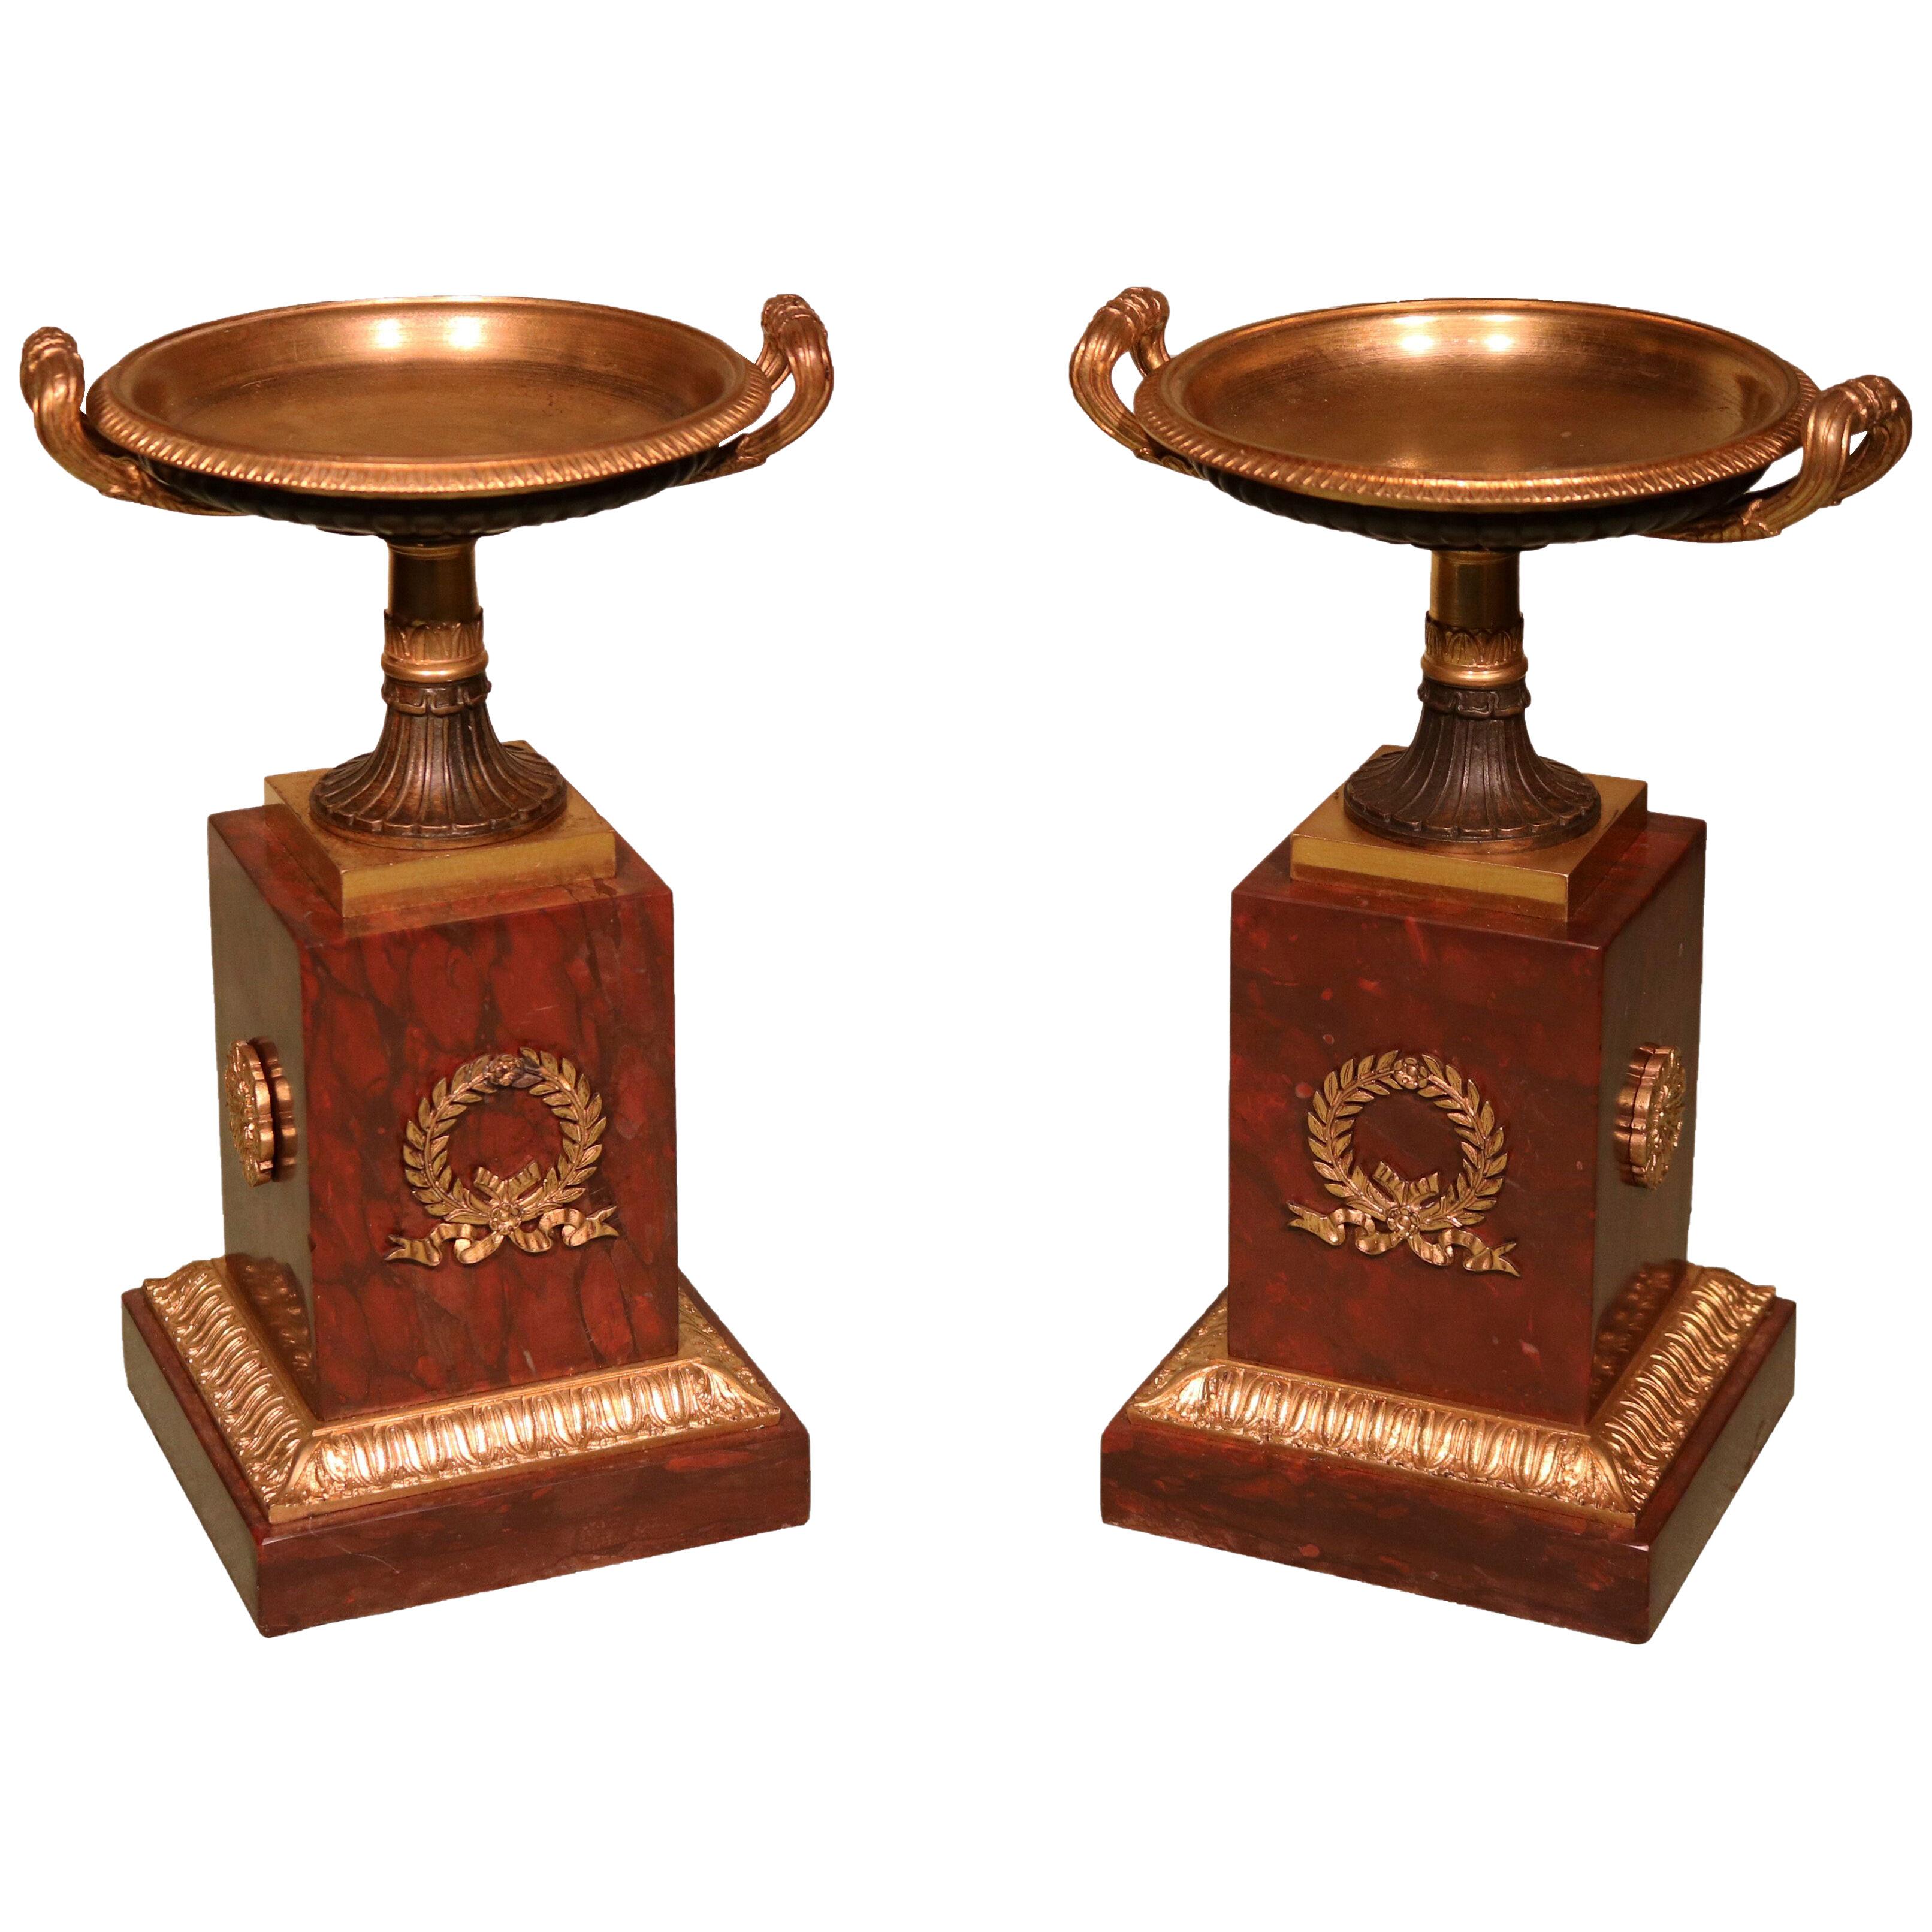 A pair of 19th century red marble and bronze Regency period Tazzas